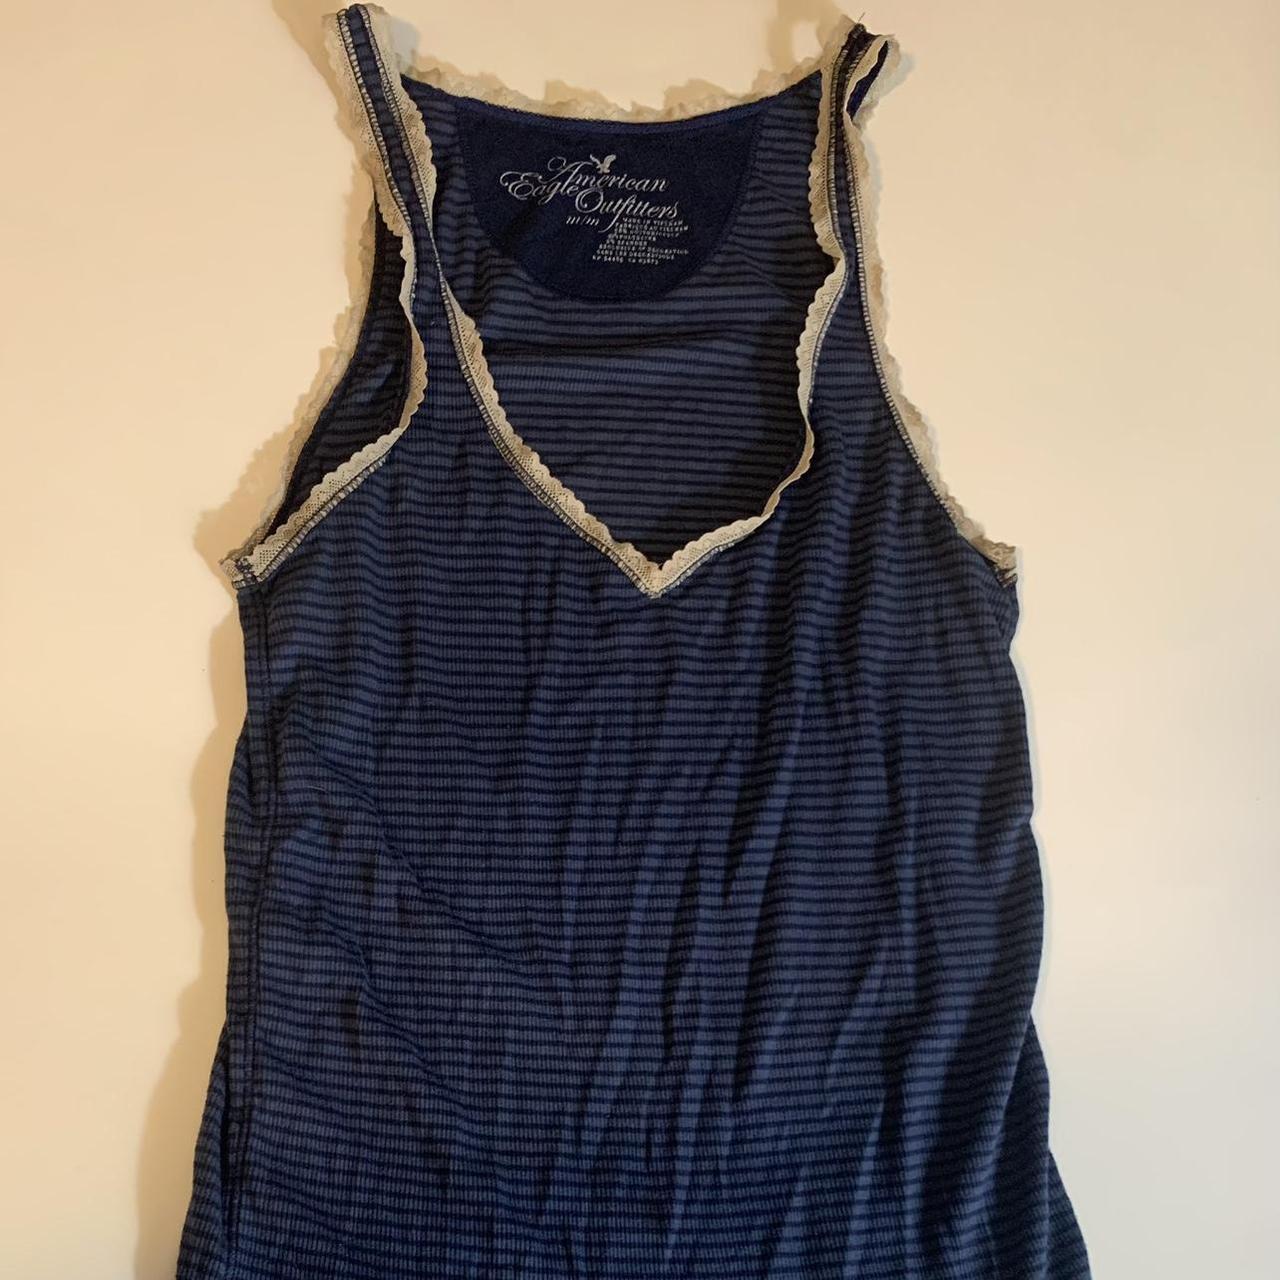 Striped 2000s American Eagle Outfitters fitted tank... - Depop